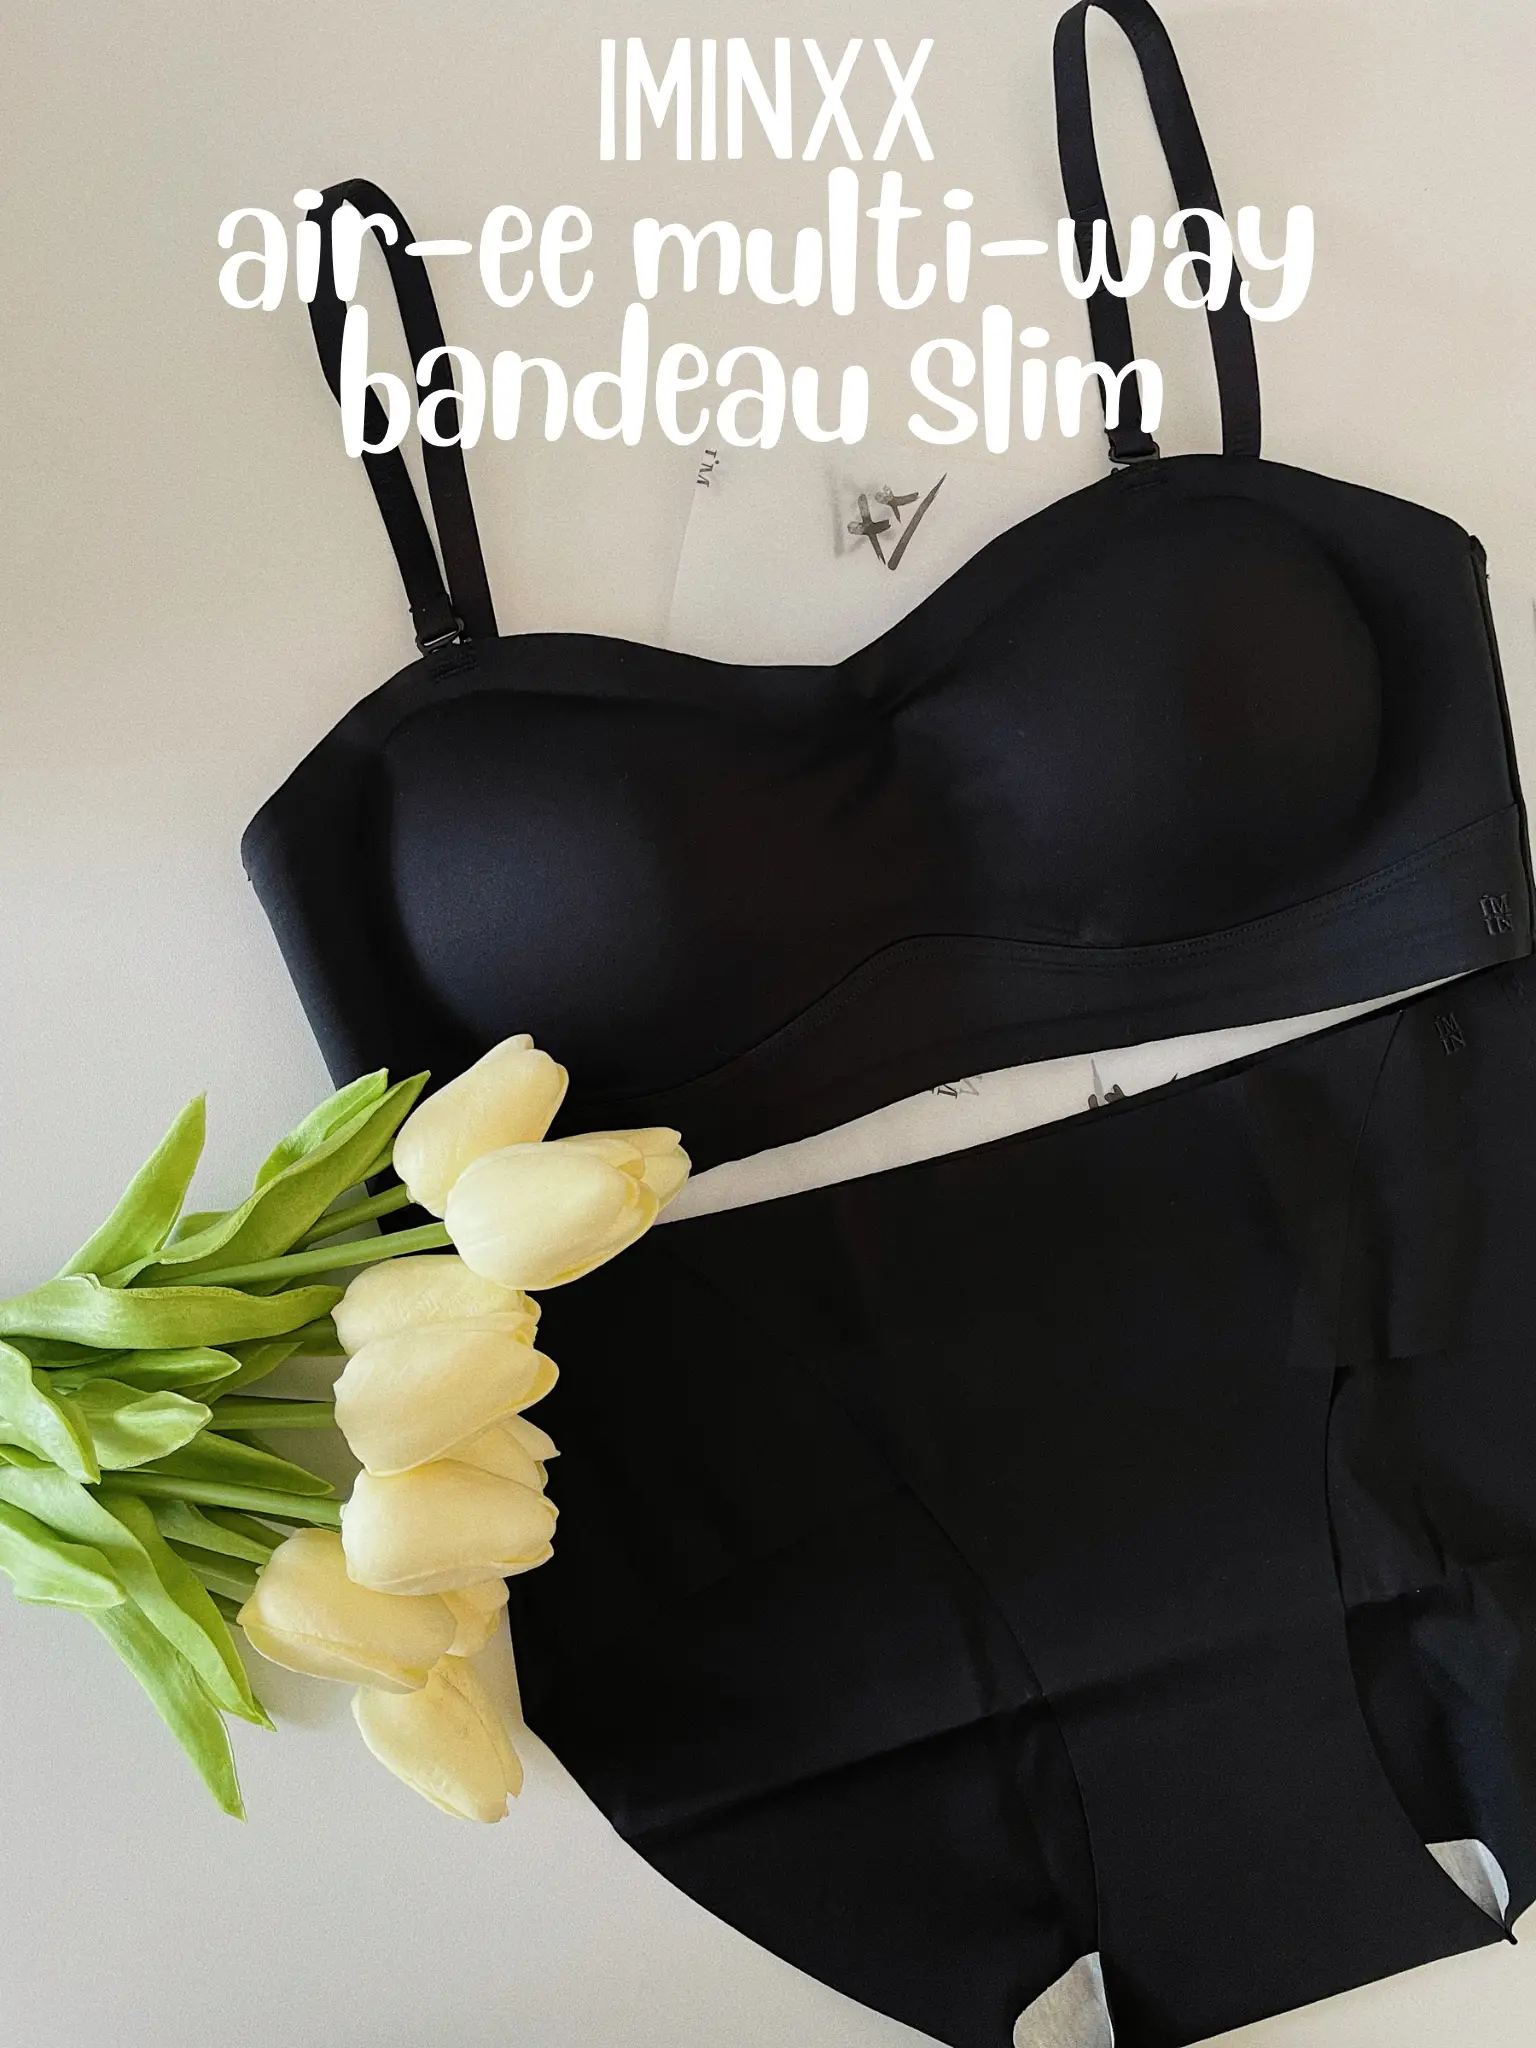 LUVLETTE Plus Size Bra Try On, Back smoothing and Cute?! YES.